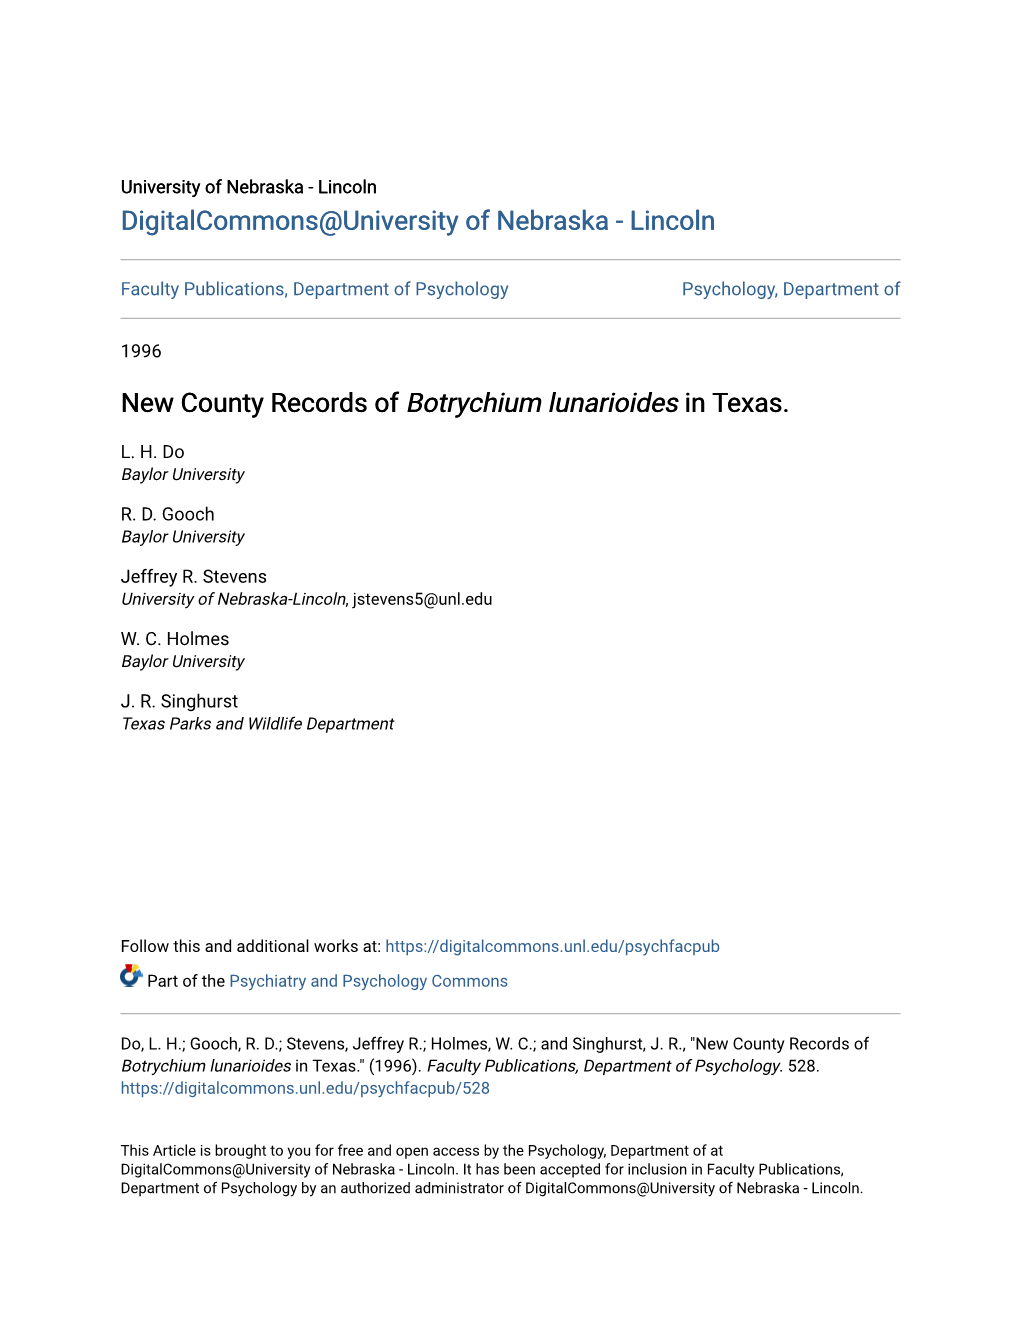 New County Records of Botrychium Lunarioides in Texas